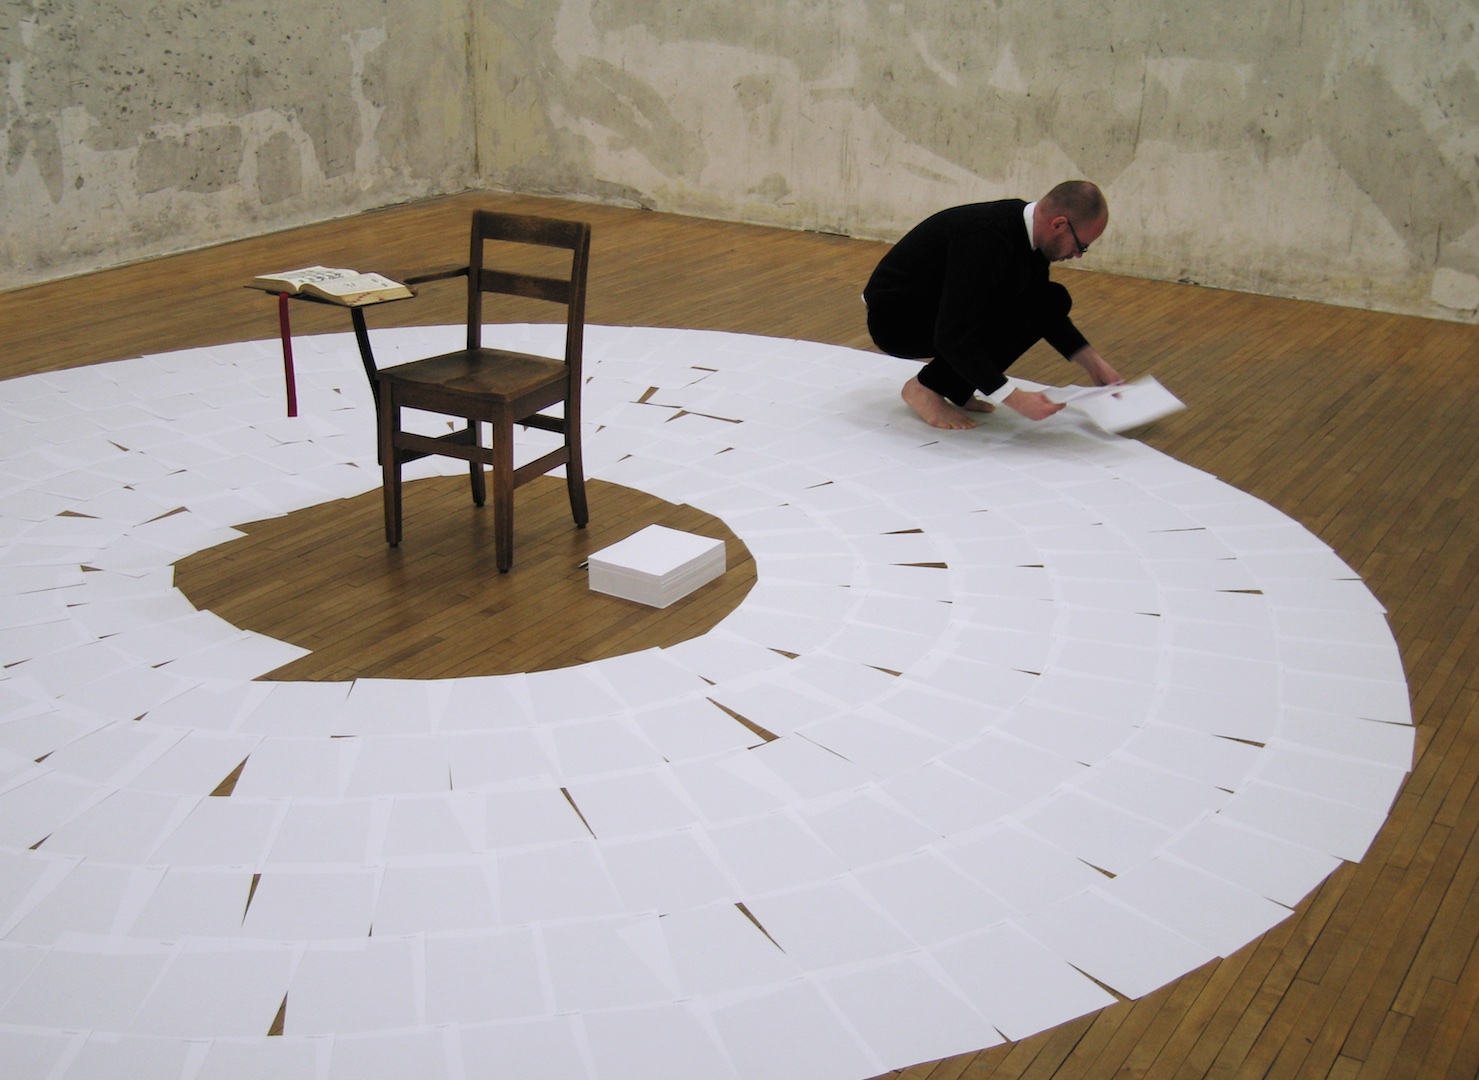     Indexical Scale , 2005  Performance Art  